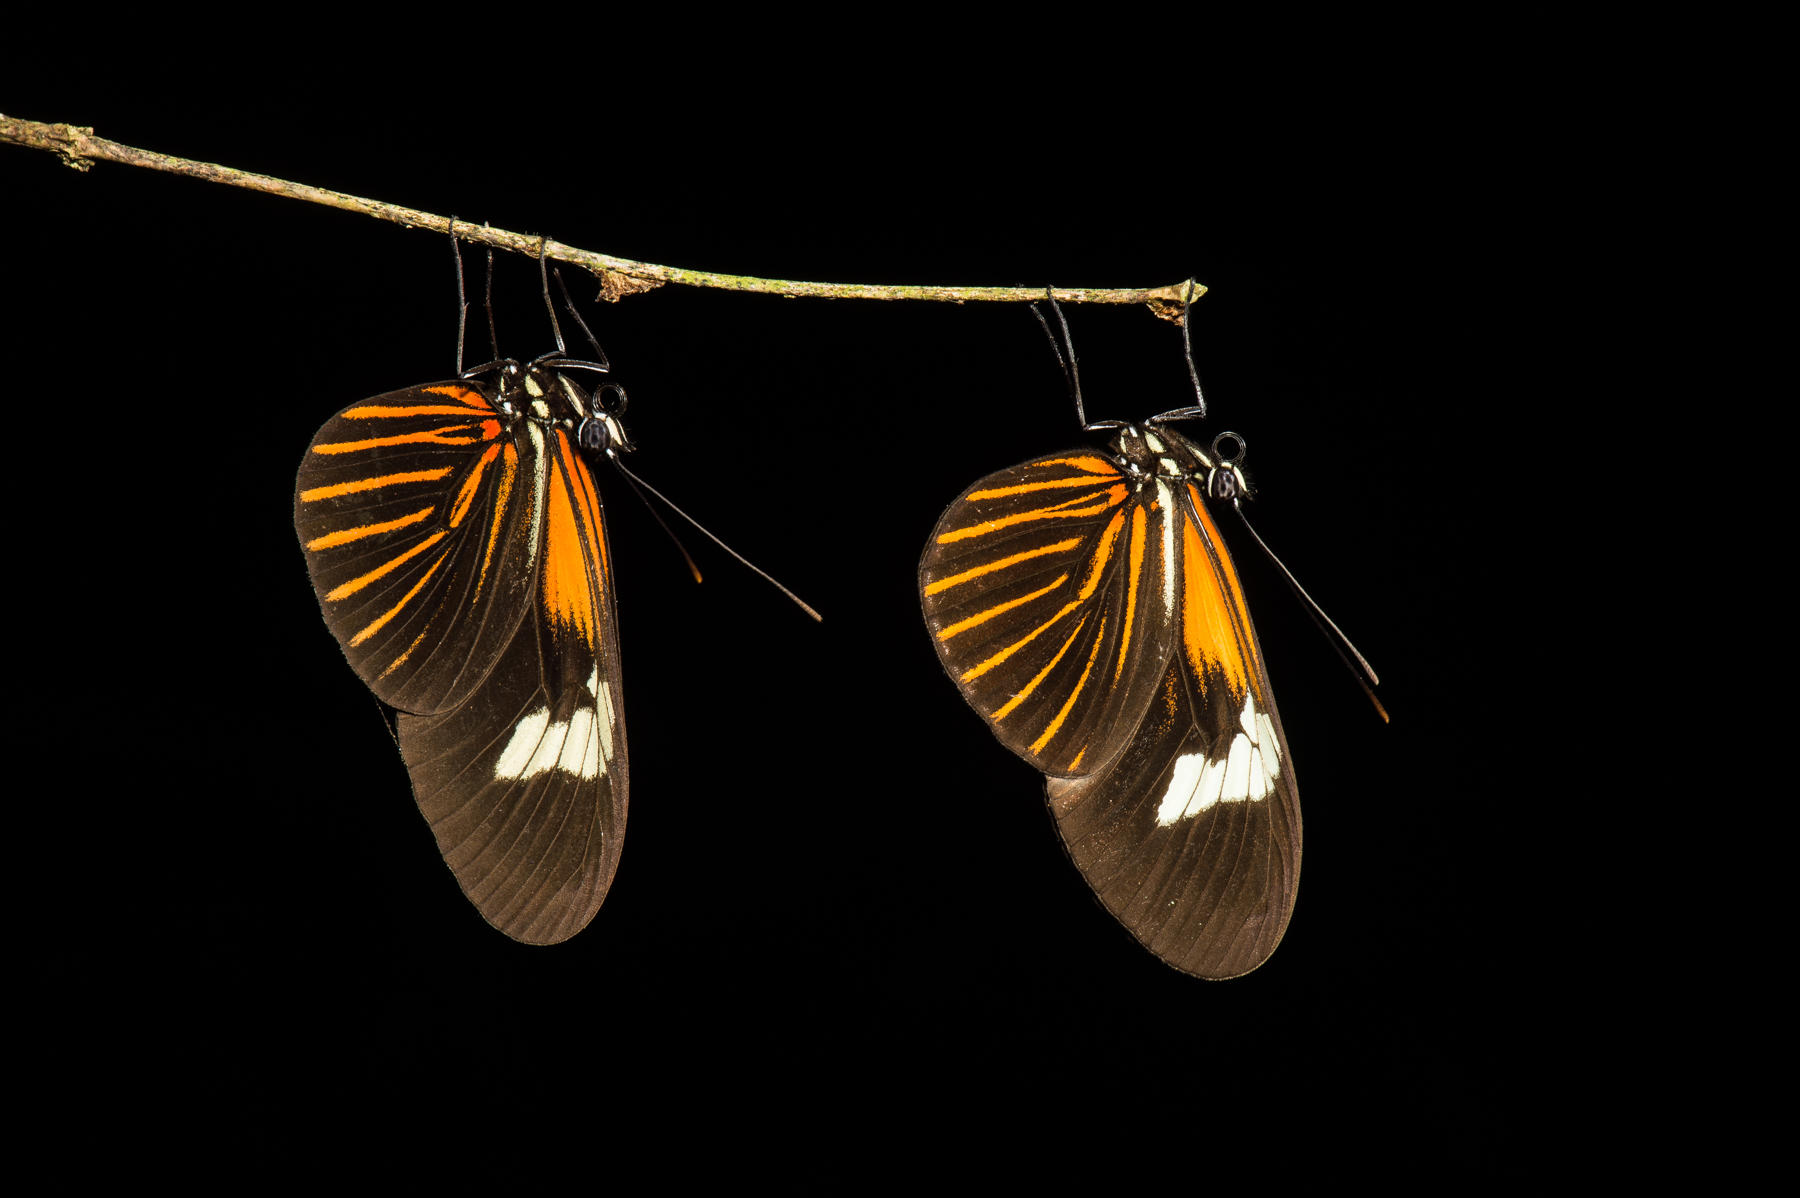 Poisonous Passion Vine butterflies (heliconius erato) sleeping together in a butterfly roost in Peruvian rainforest